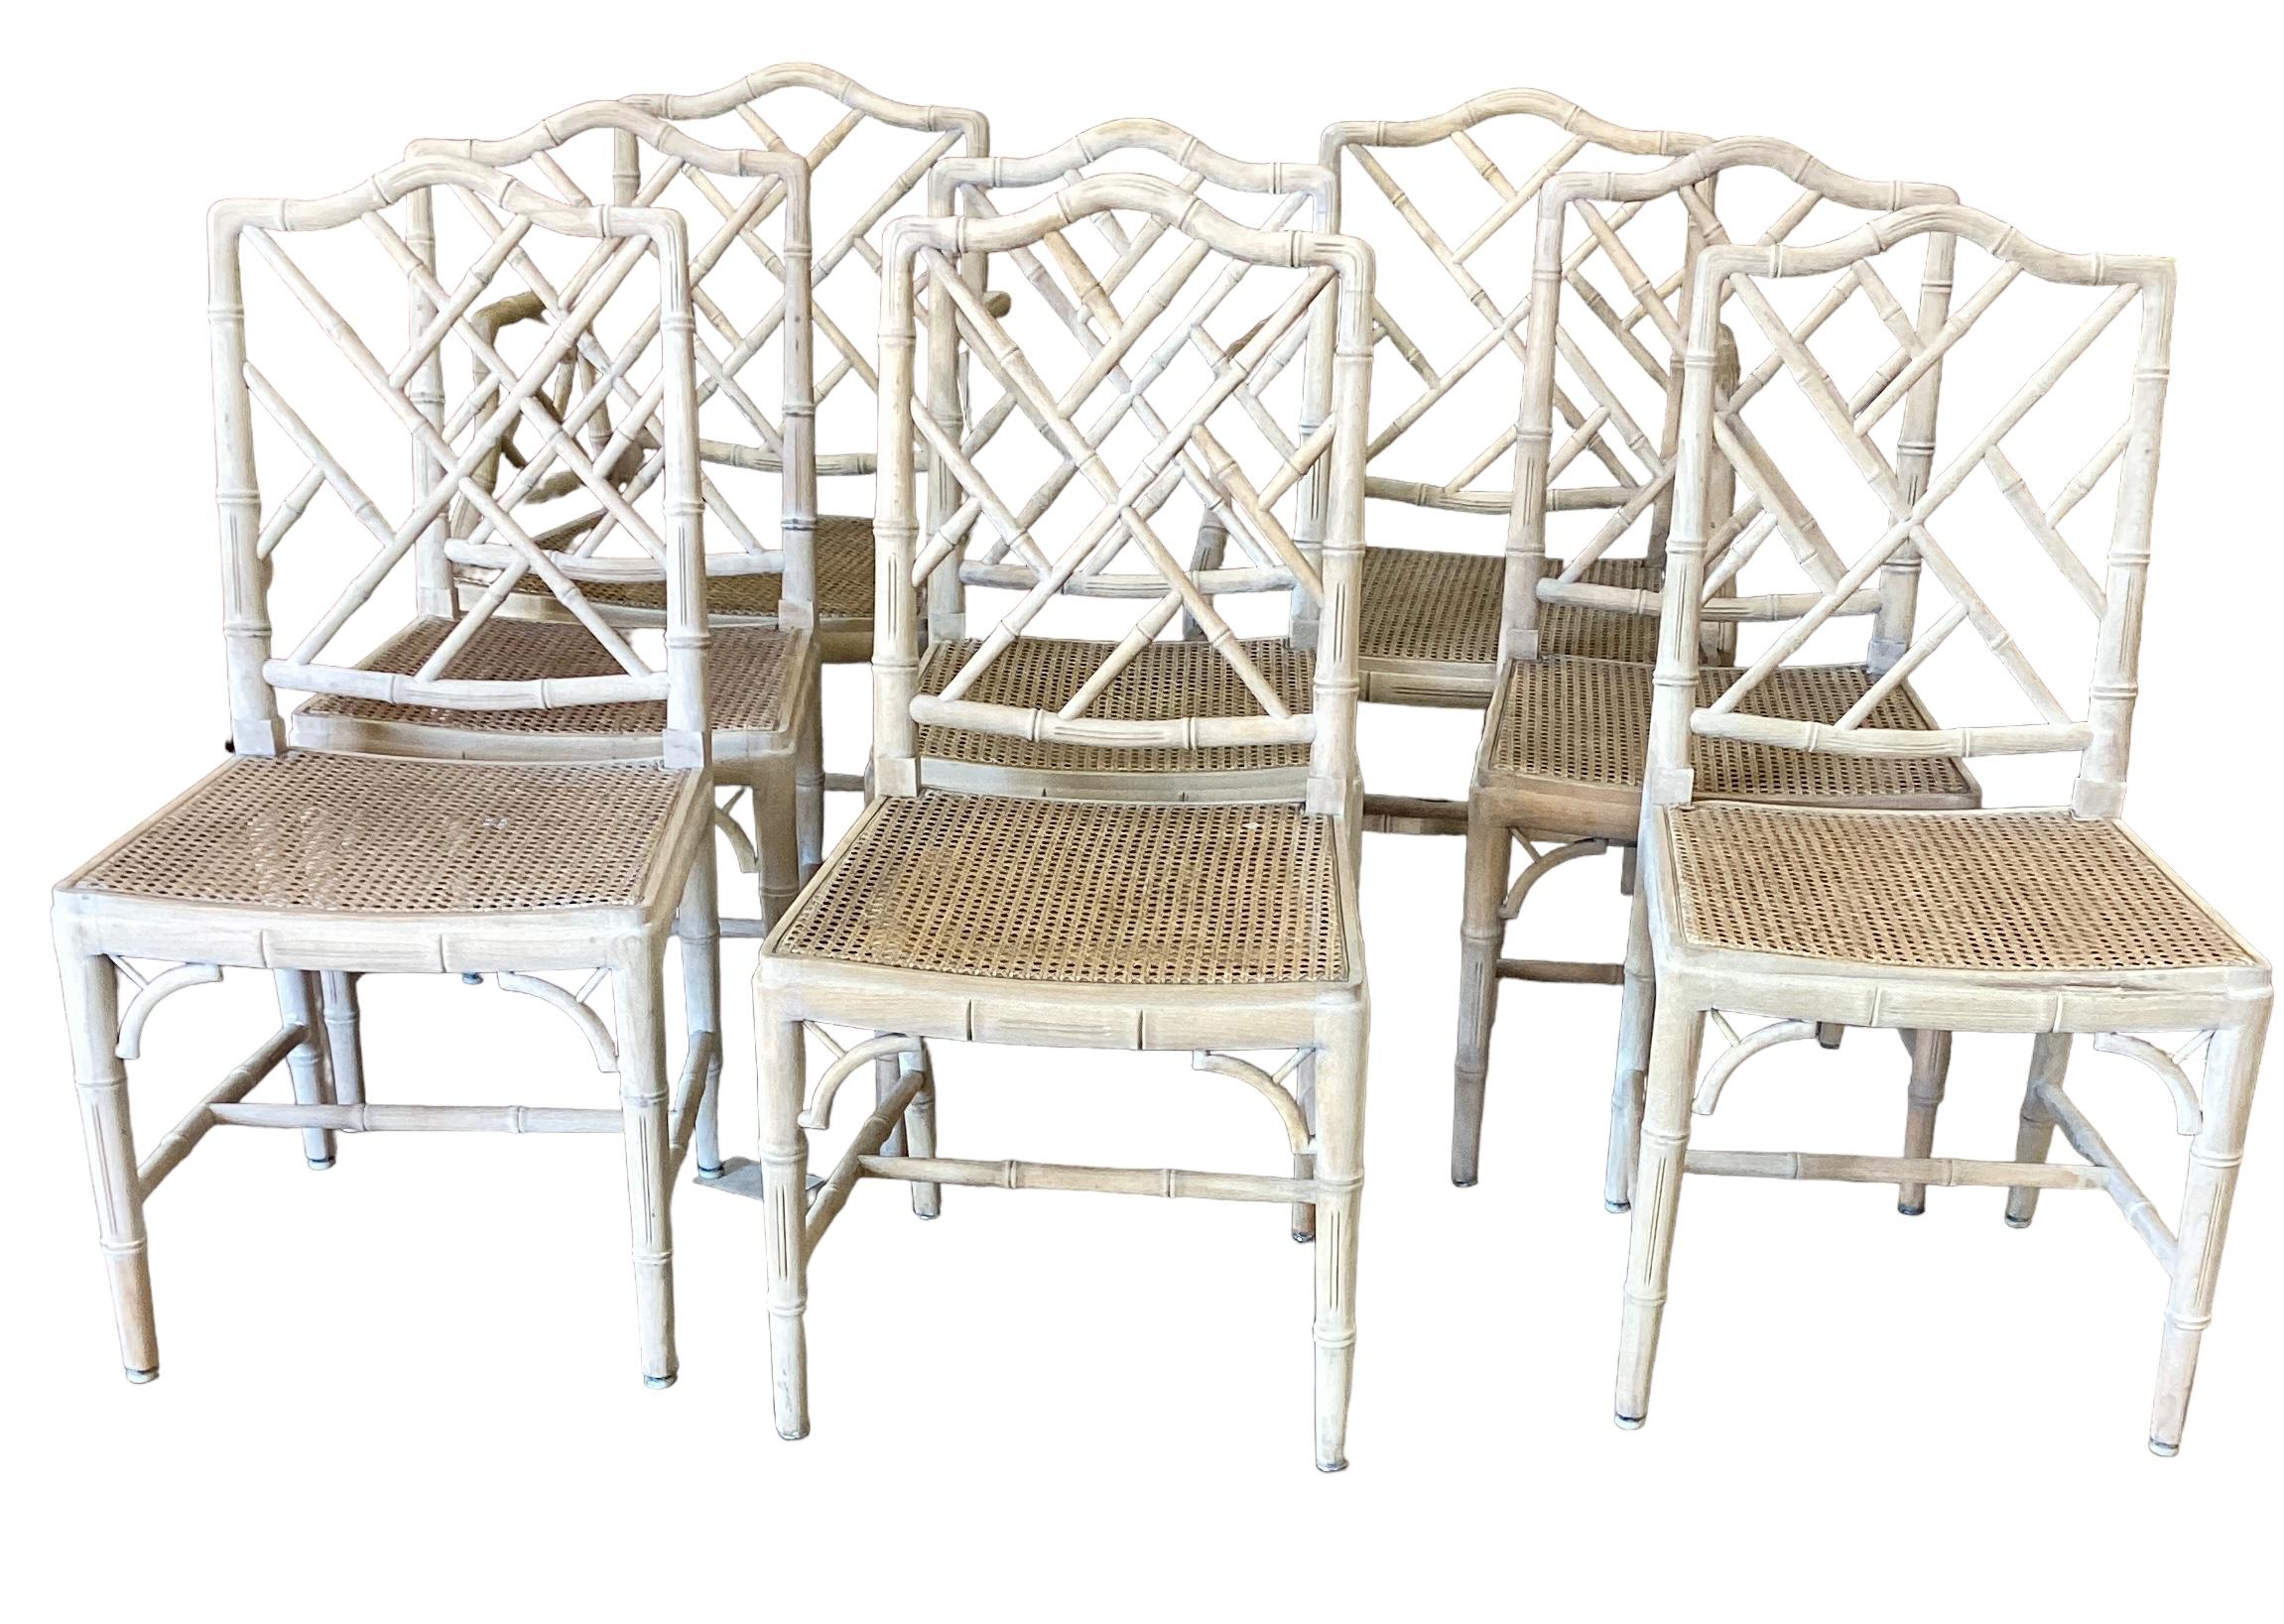 Set of 8 Bleached Chinese Chippendale Faux Bamboo Dining Chairs with caned seats. The side chairs measure 18”W x 17”D x 37.5H